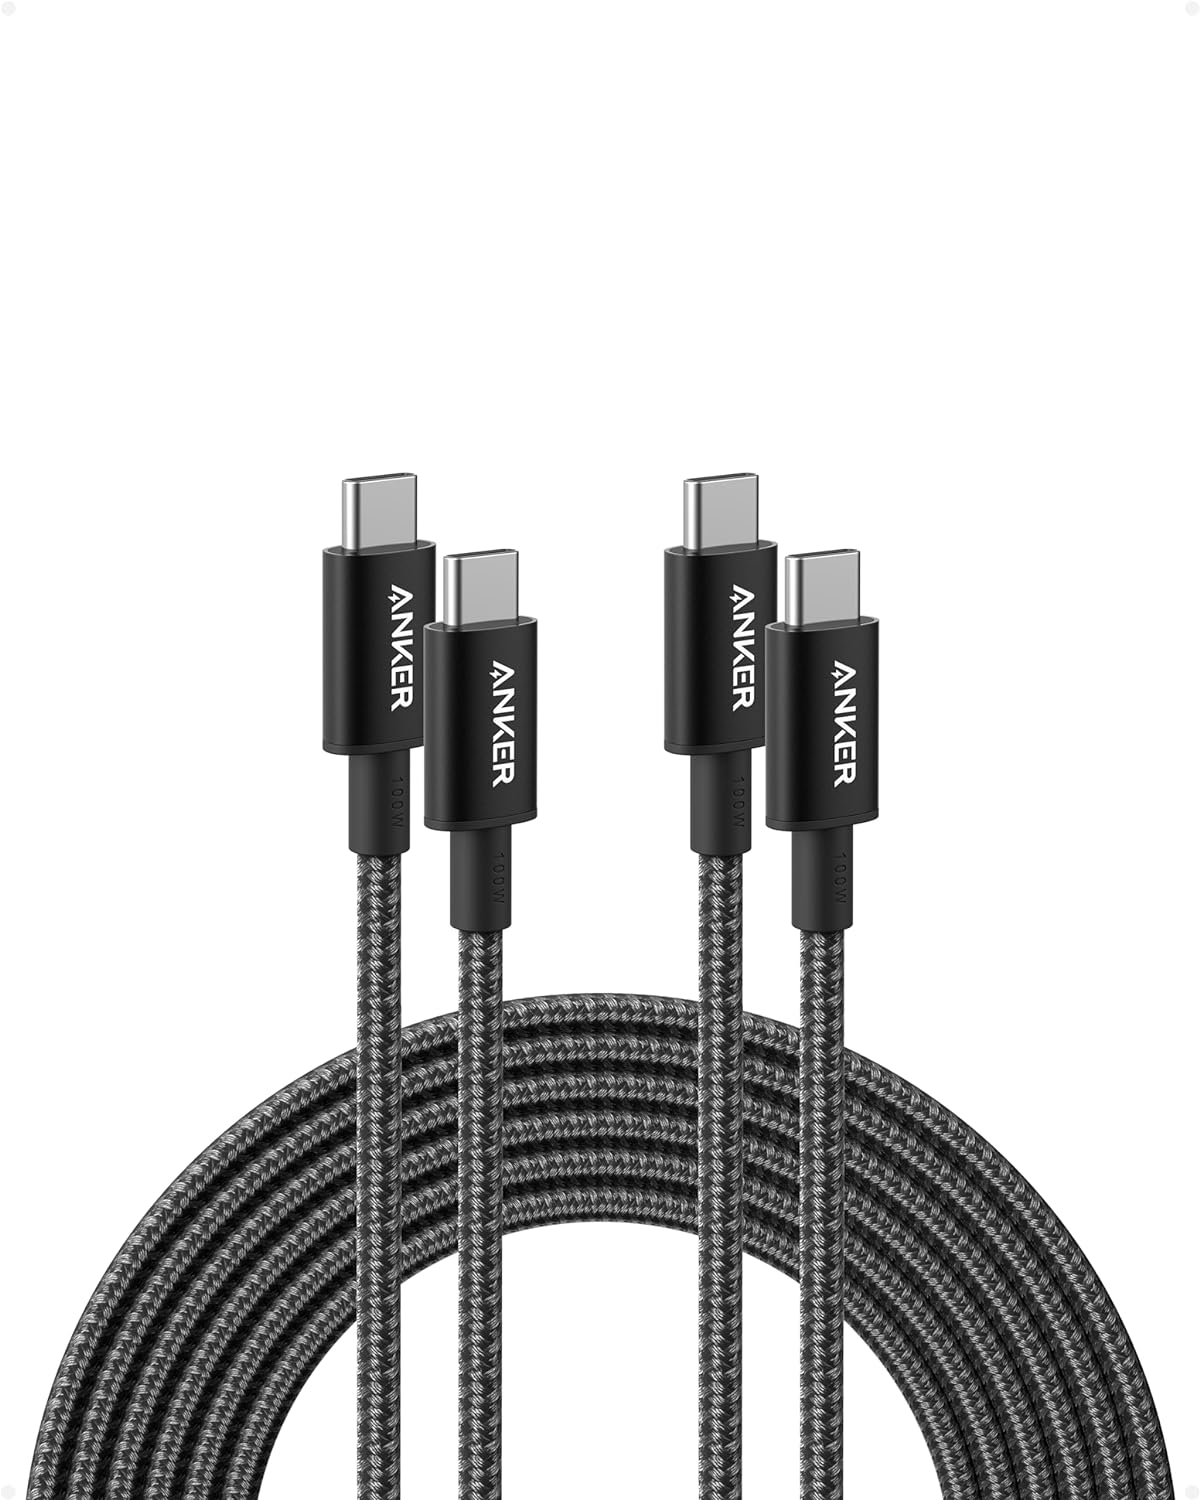 Anker USB C Cable 100W (10ft, 2pack), New Nylon USB C to USB C Cable 2.0, Type C Charging Cable Fast Charge